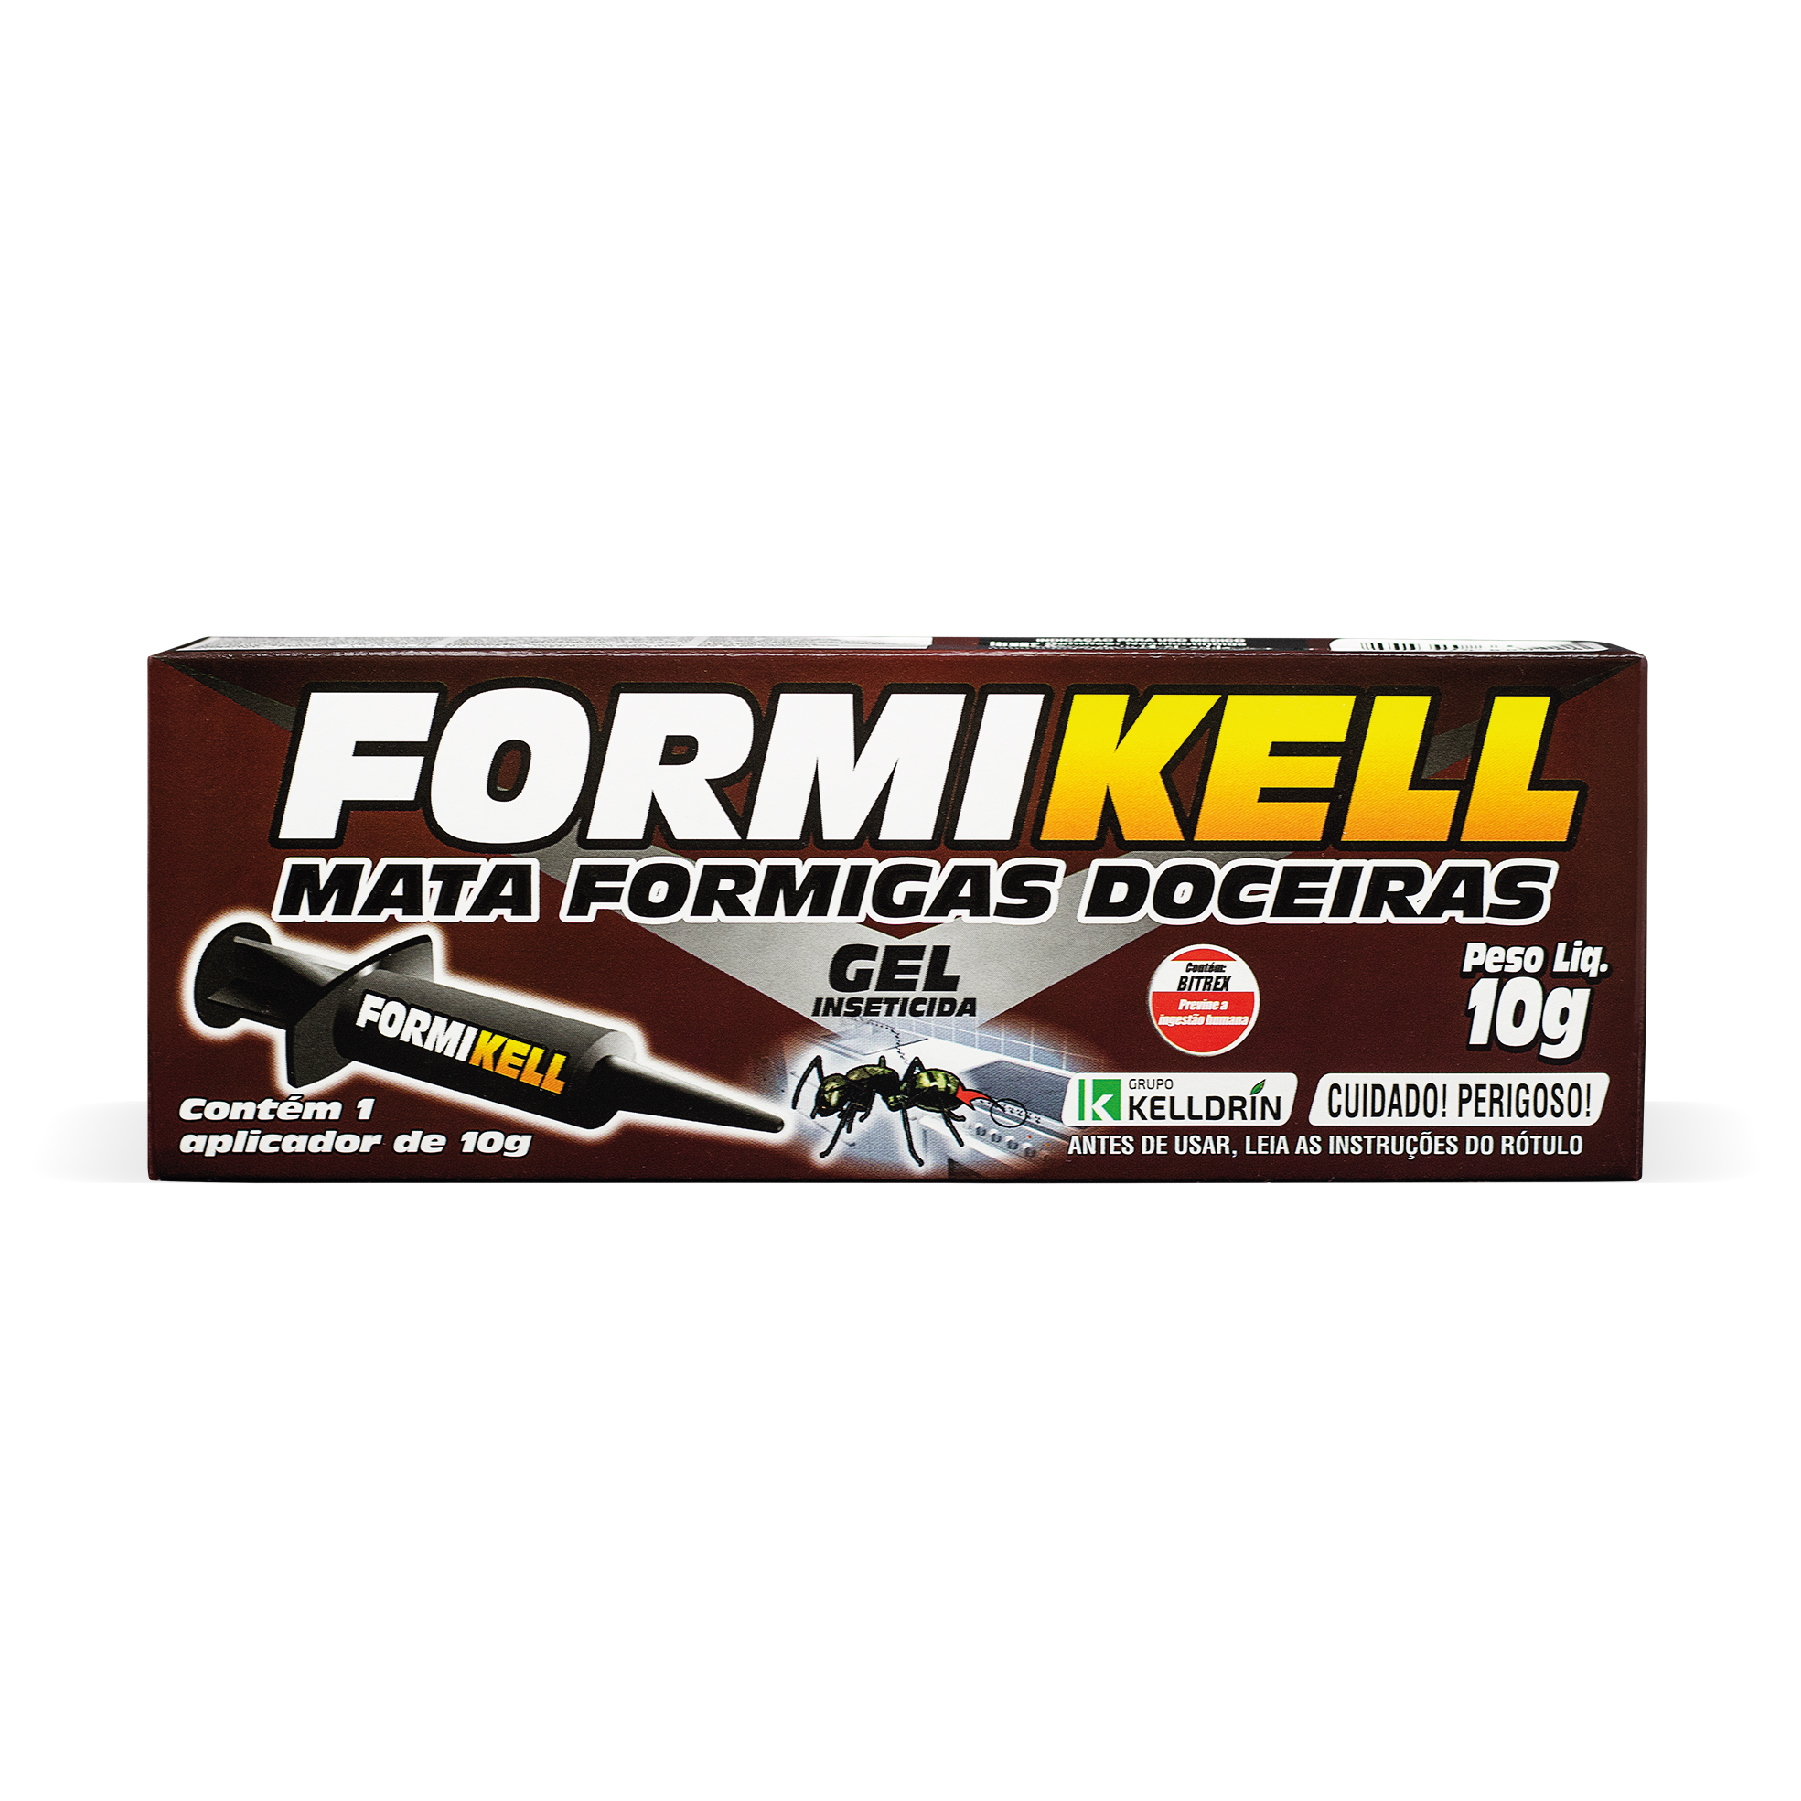 Formikell